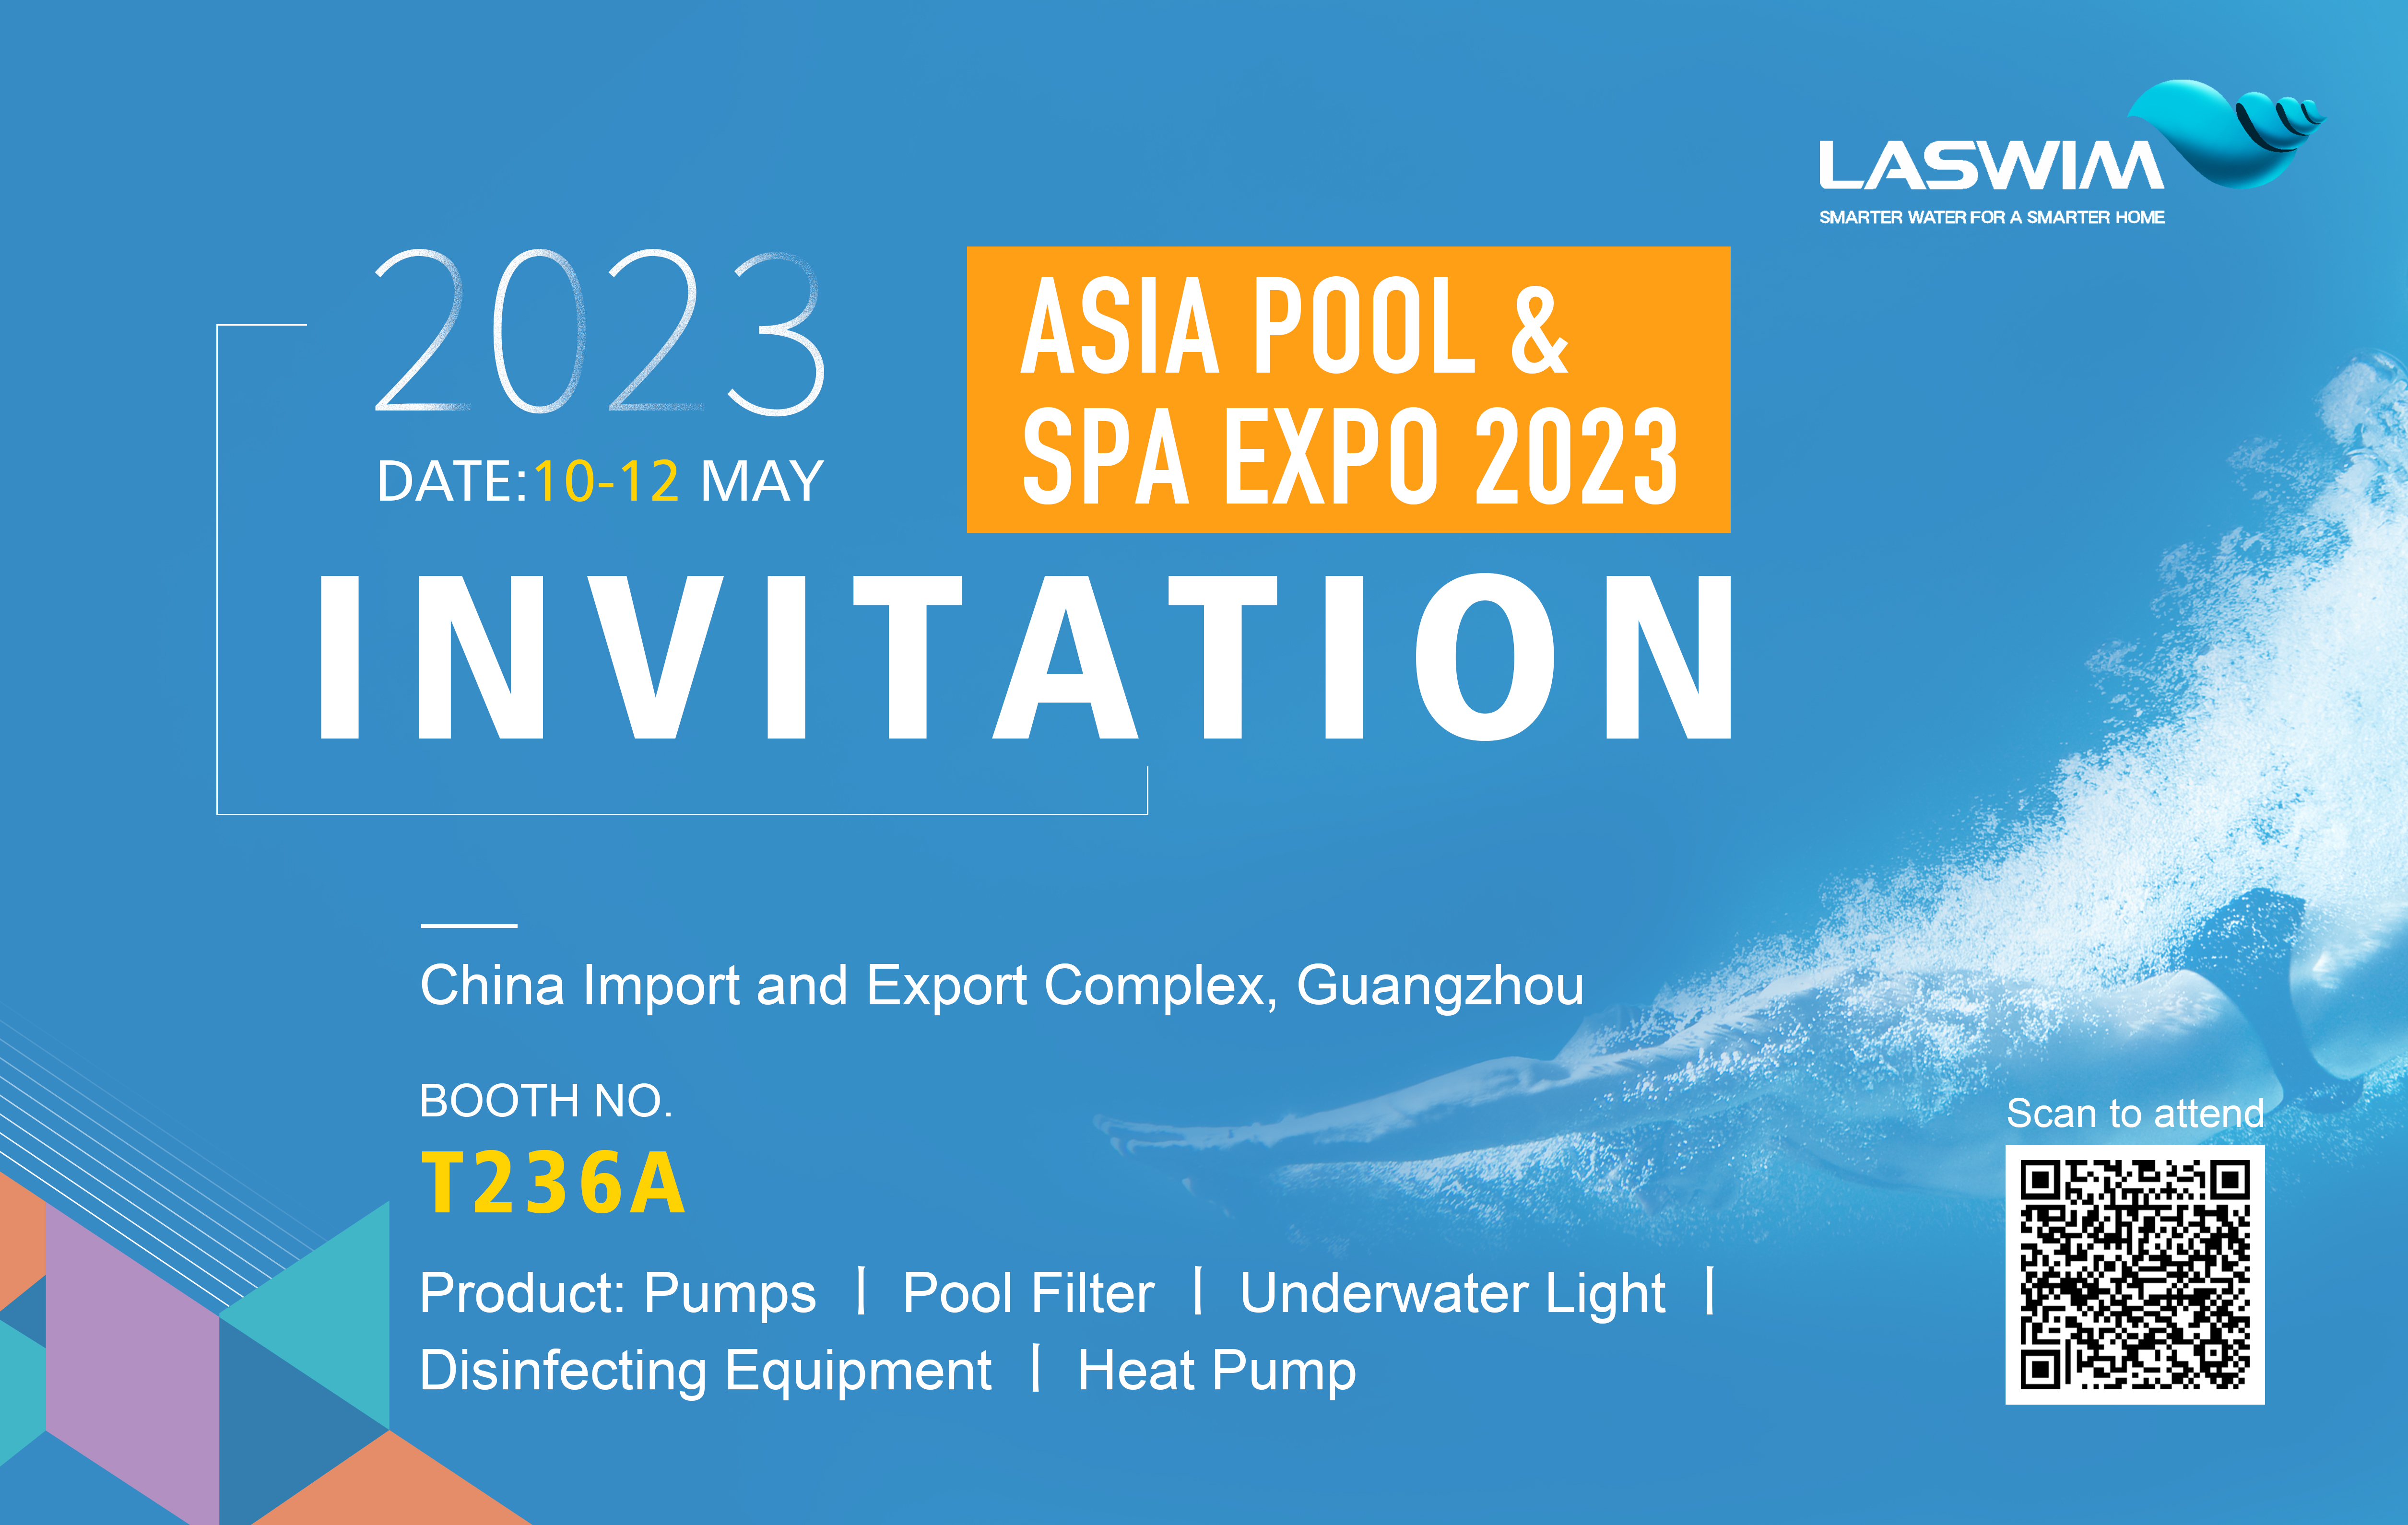 See you at the ASIA POOL & SPA EXPO 2023